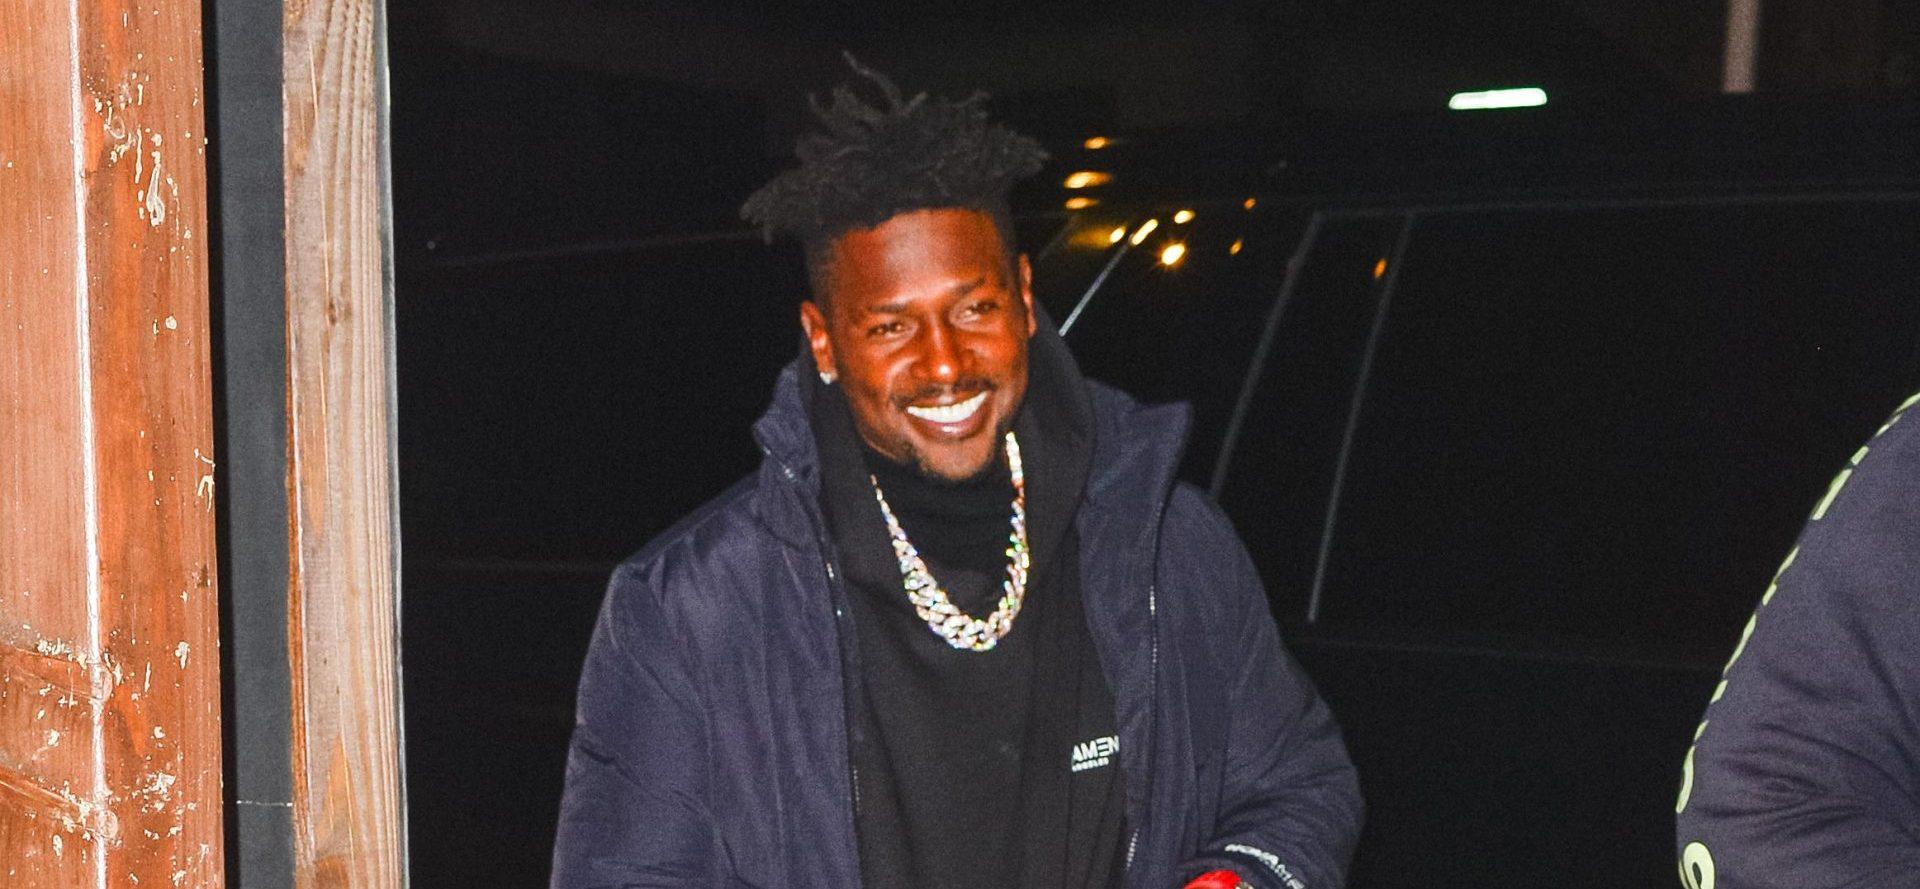 Antonio Brown’s $1M ‘Diamond Fingers’ Called Out In Jewelry Lawsuit